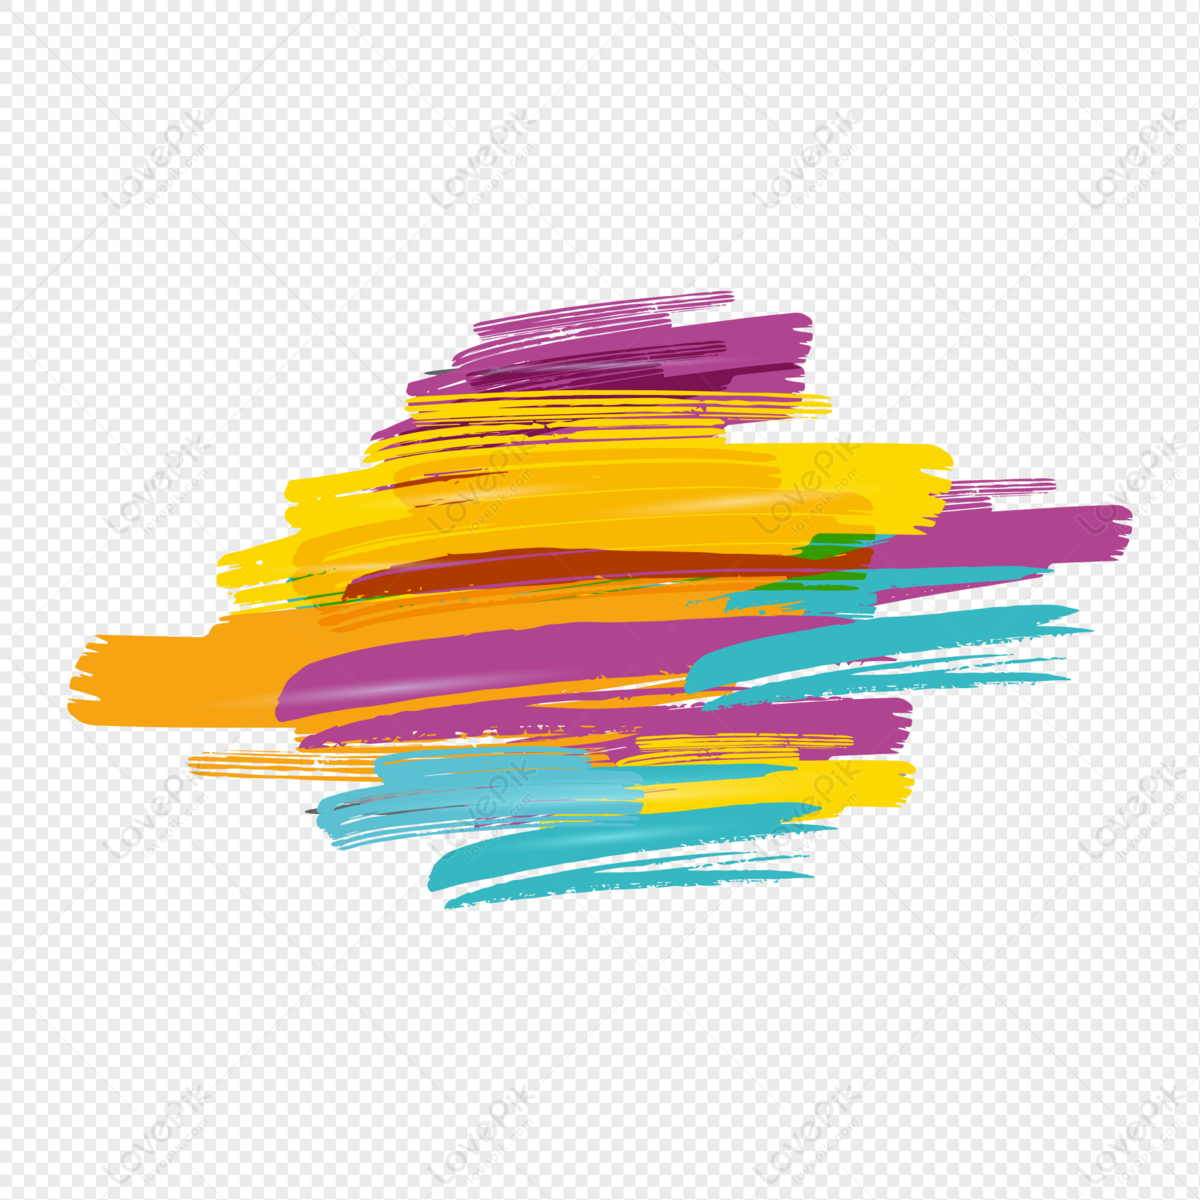 Painting Board Clipart Hd PNG, Color Decorative Painting Paint